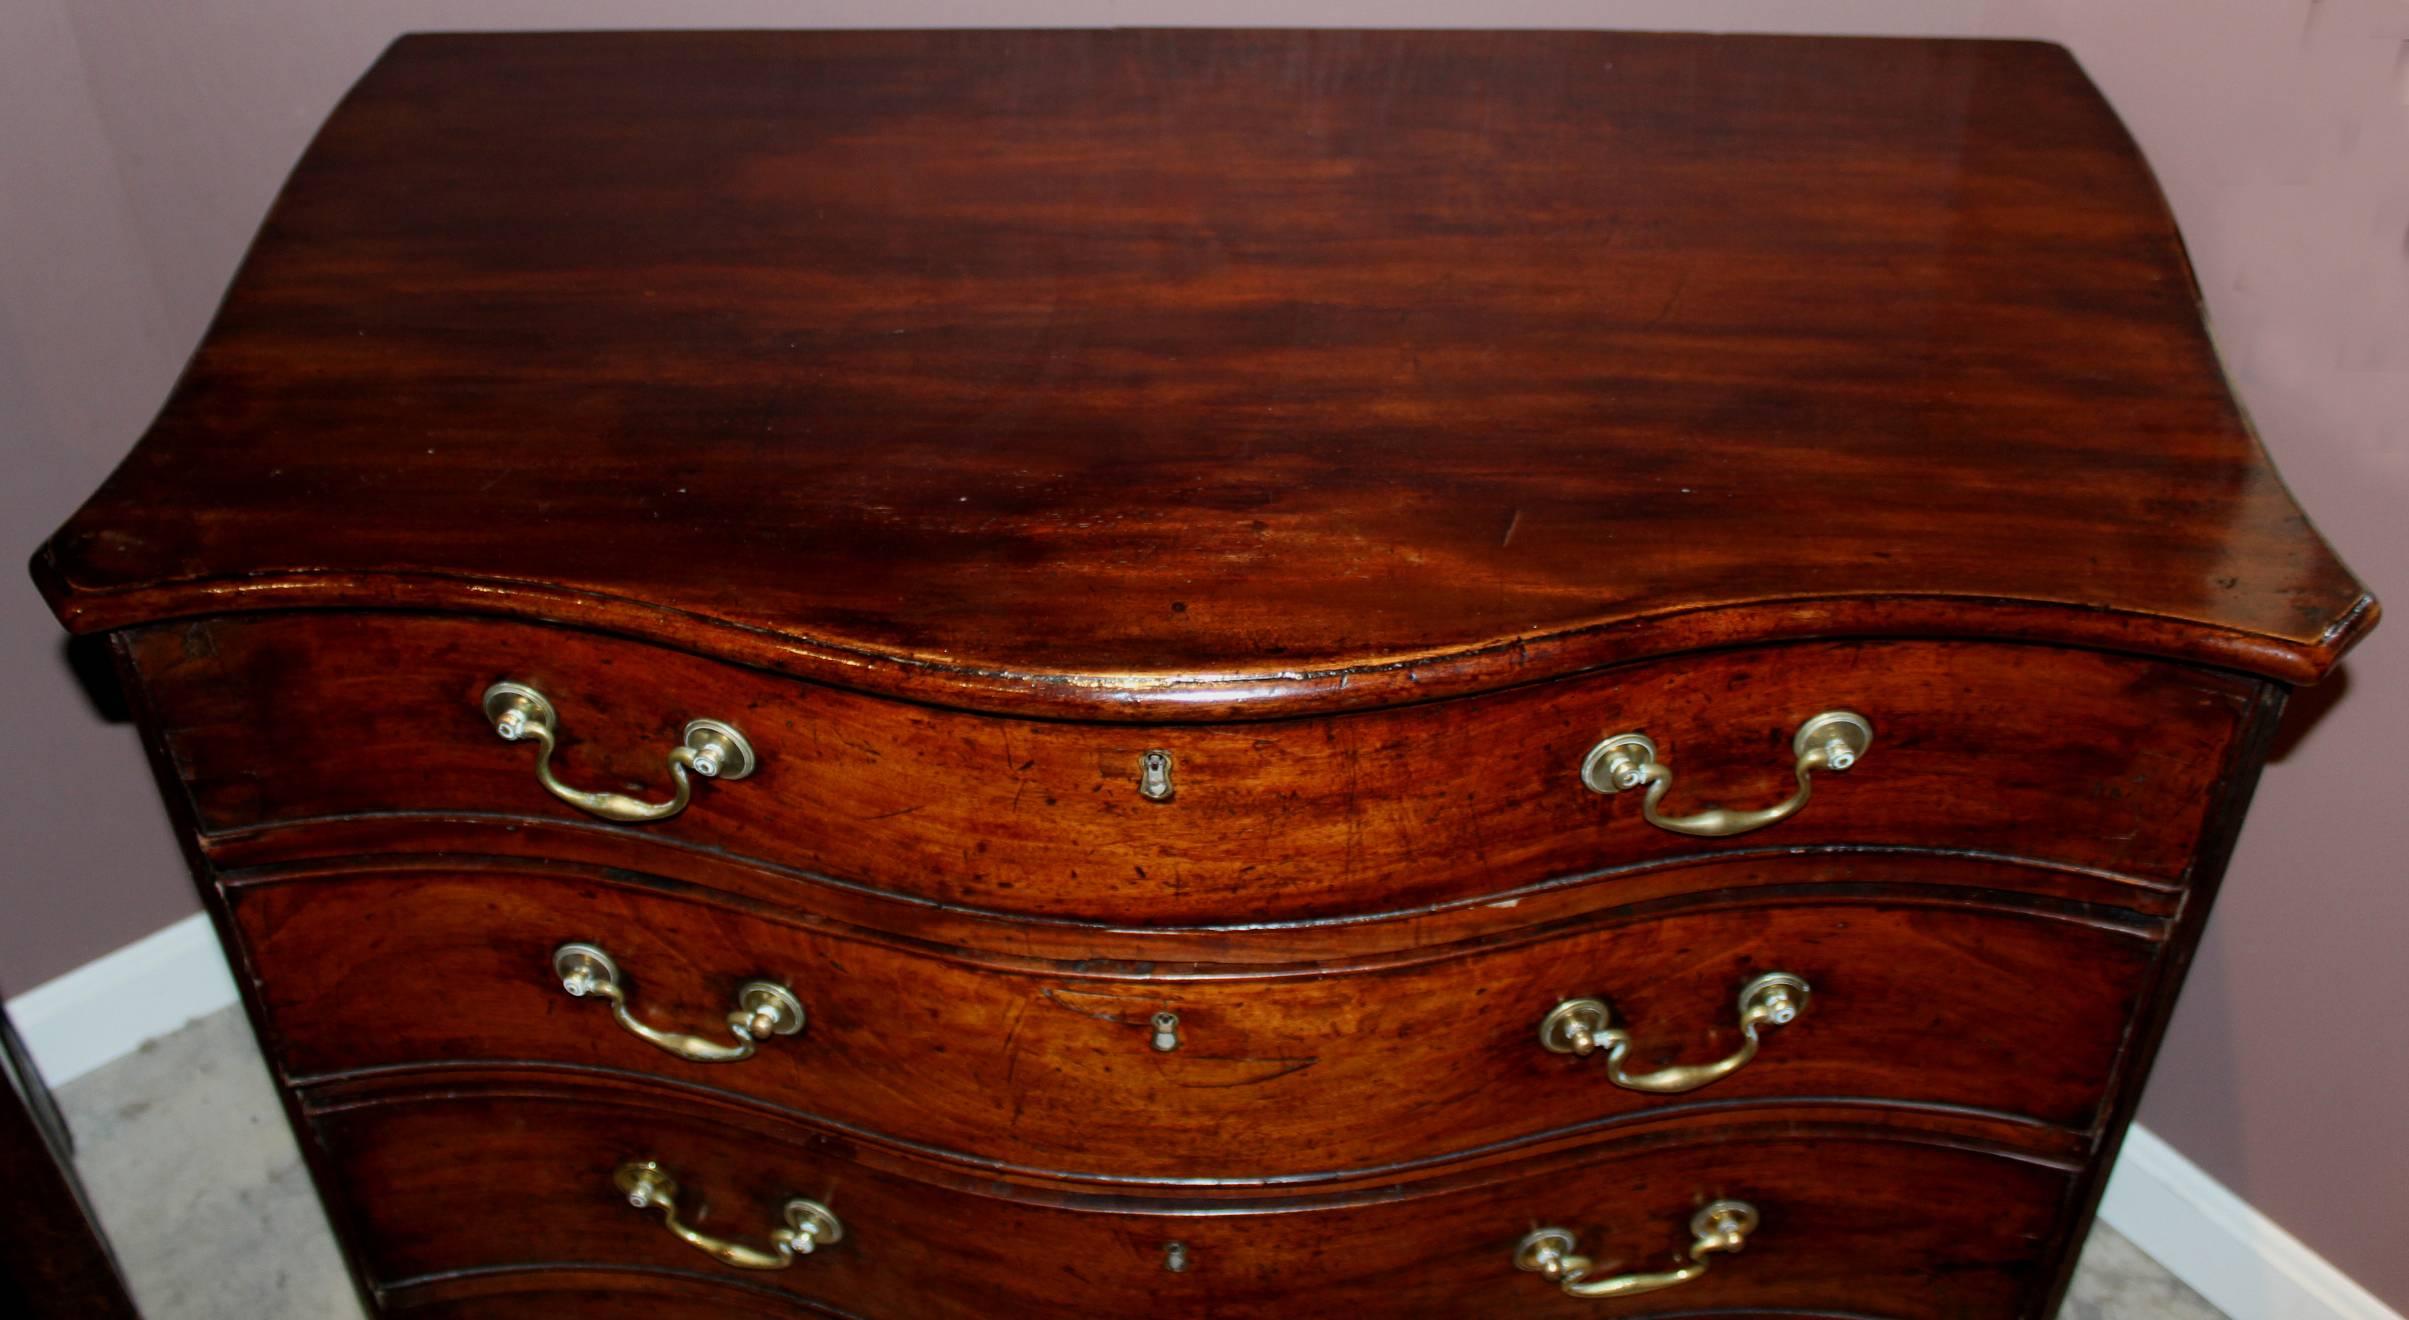 A fine Georgian mahogany serpentine four drawer chest with conforming molded edge top over four graduated drawers flanked by canted reeded corners, side case handles, all supported by four bracket feet. Dates to the 18th century.
Very good to